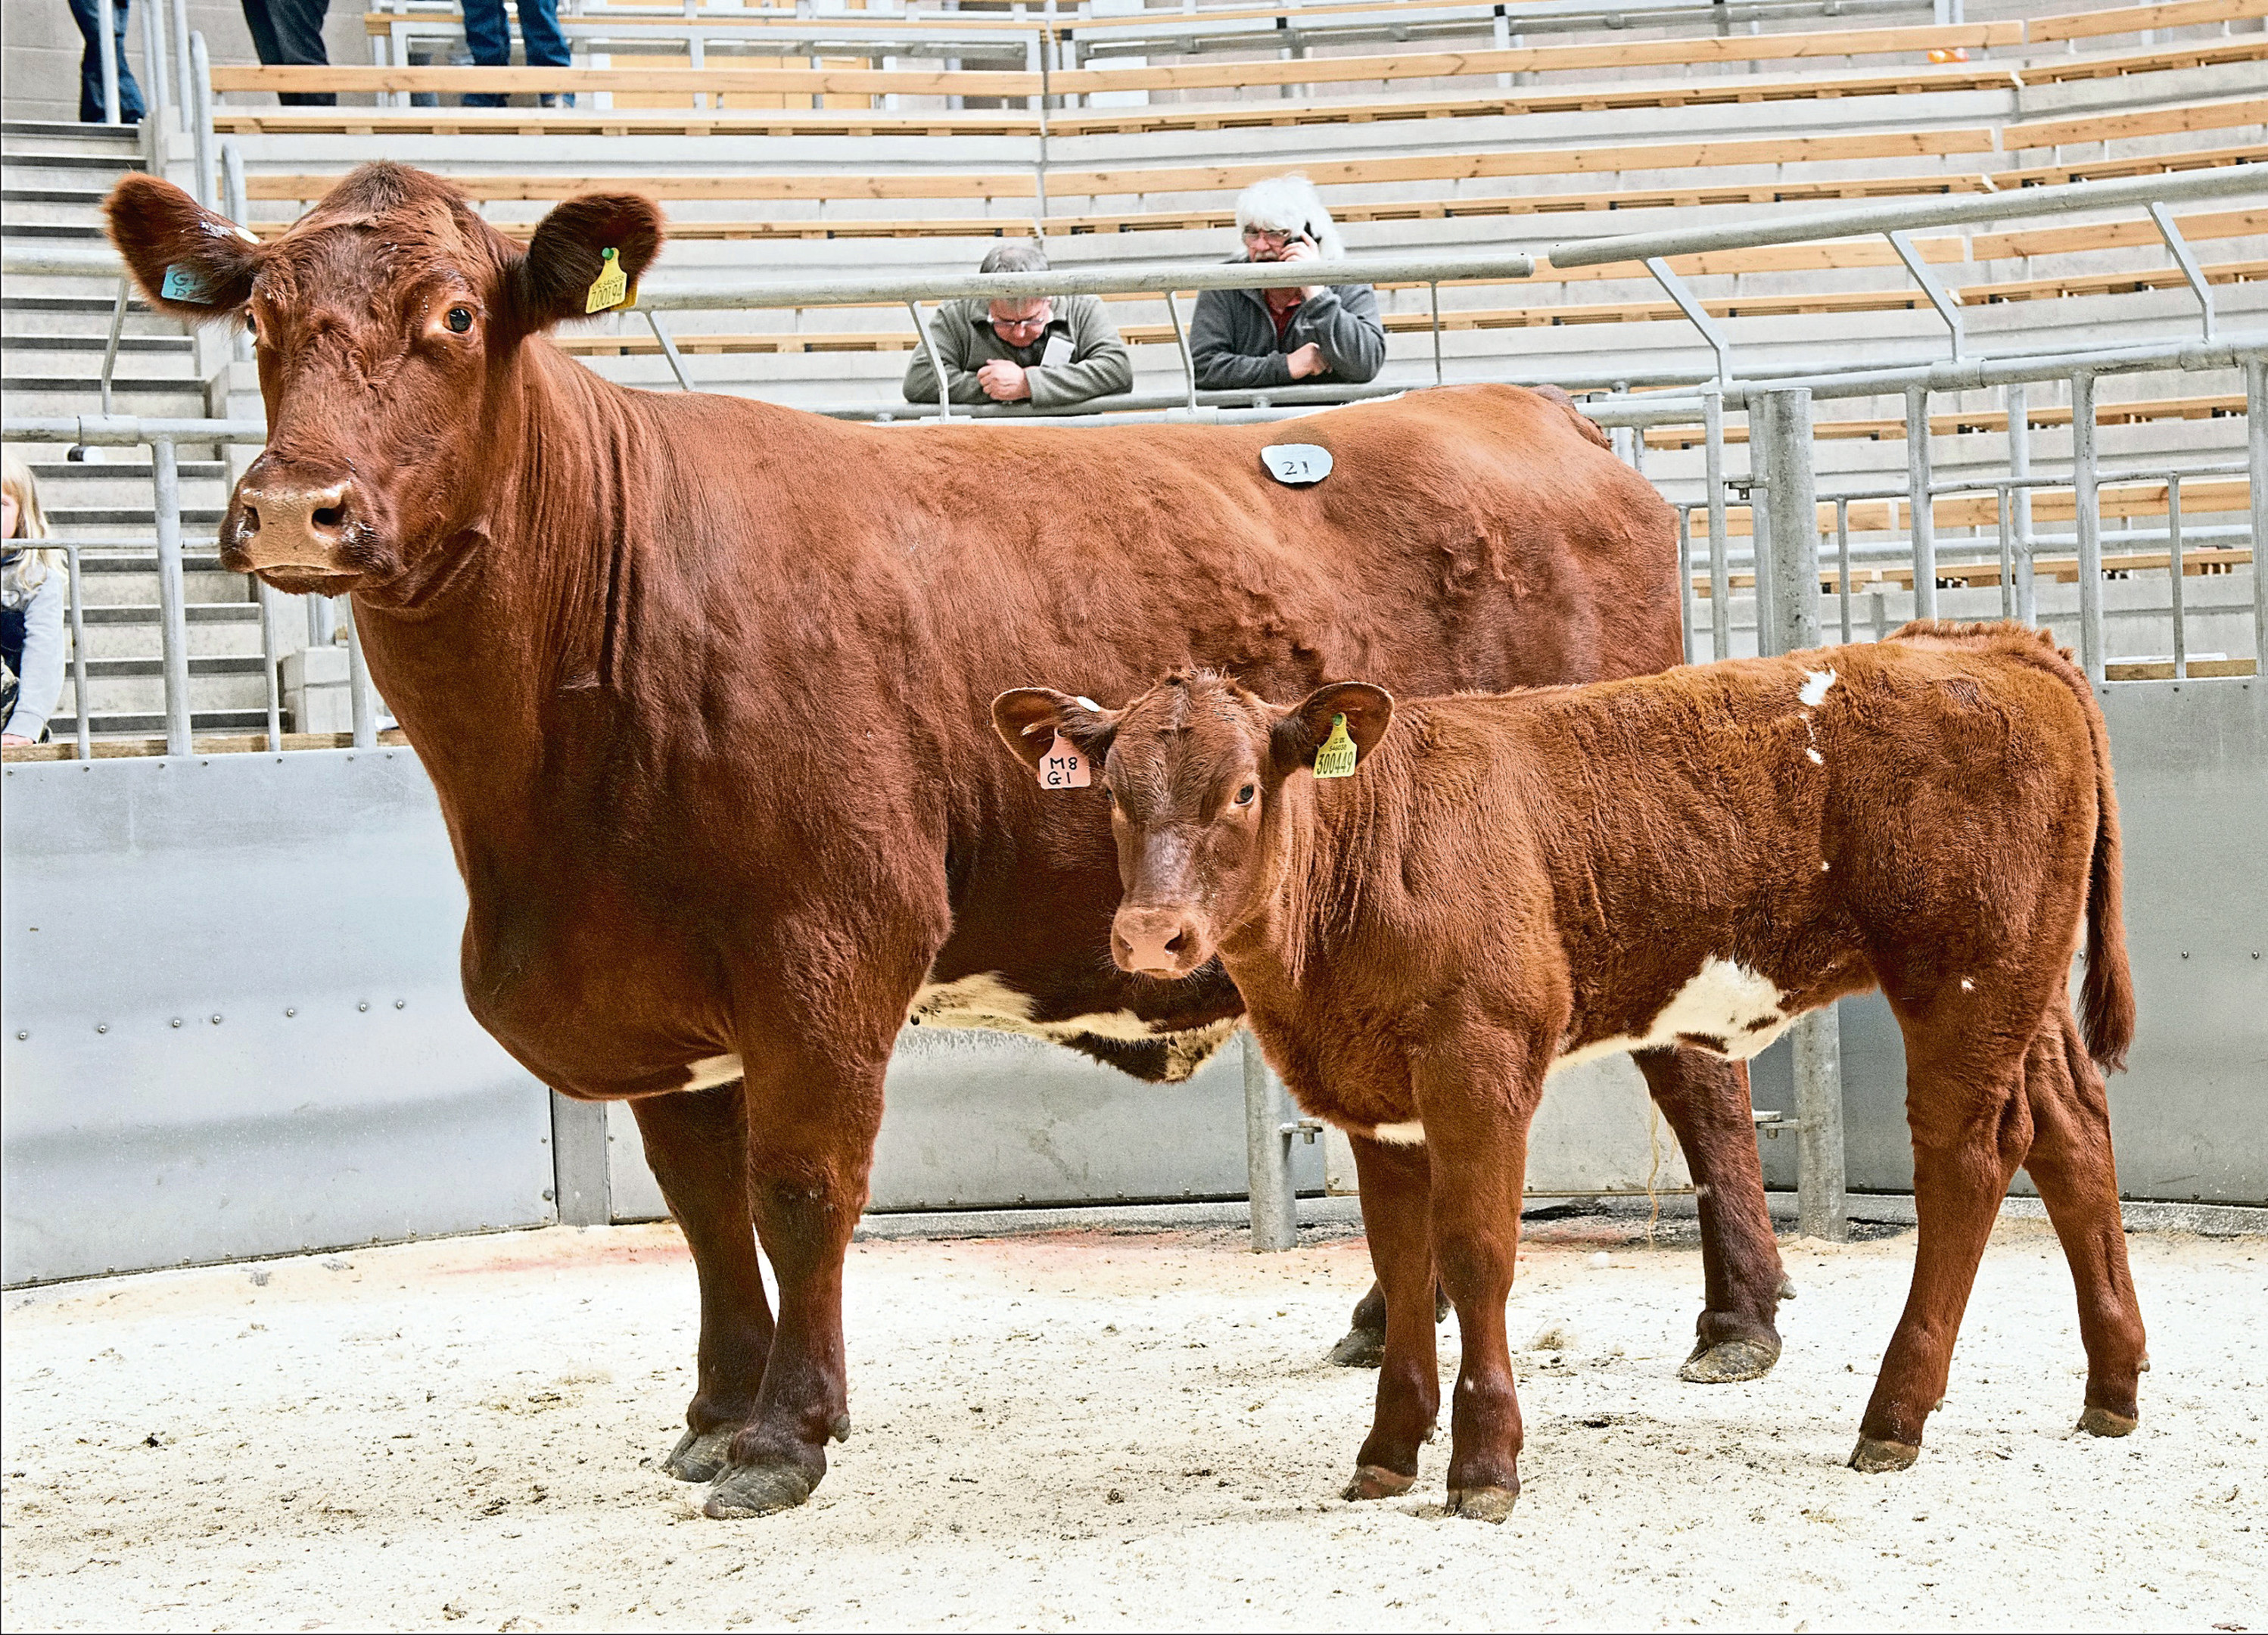 The record-priced Coldrochie Broadhooks and her calf

Picture by Ron Stephen